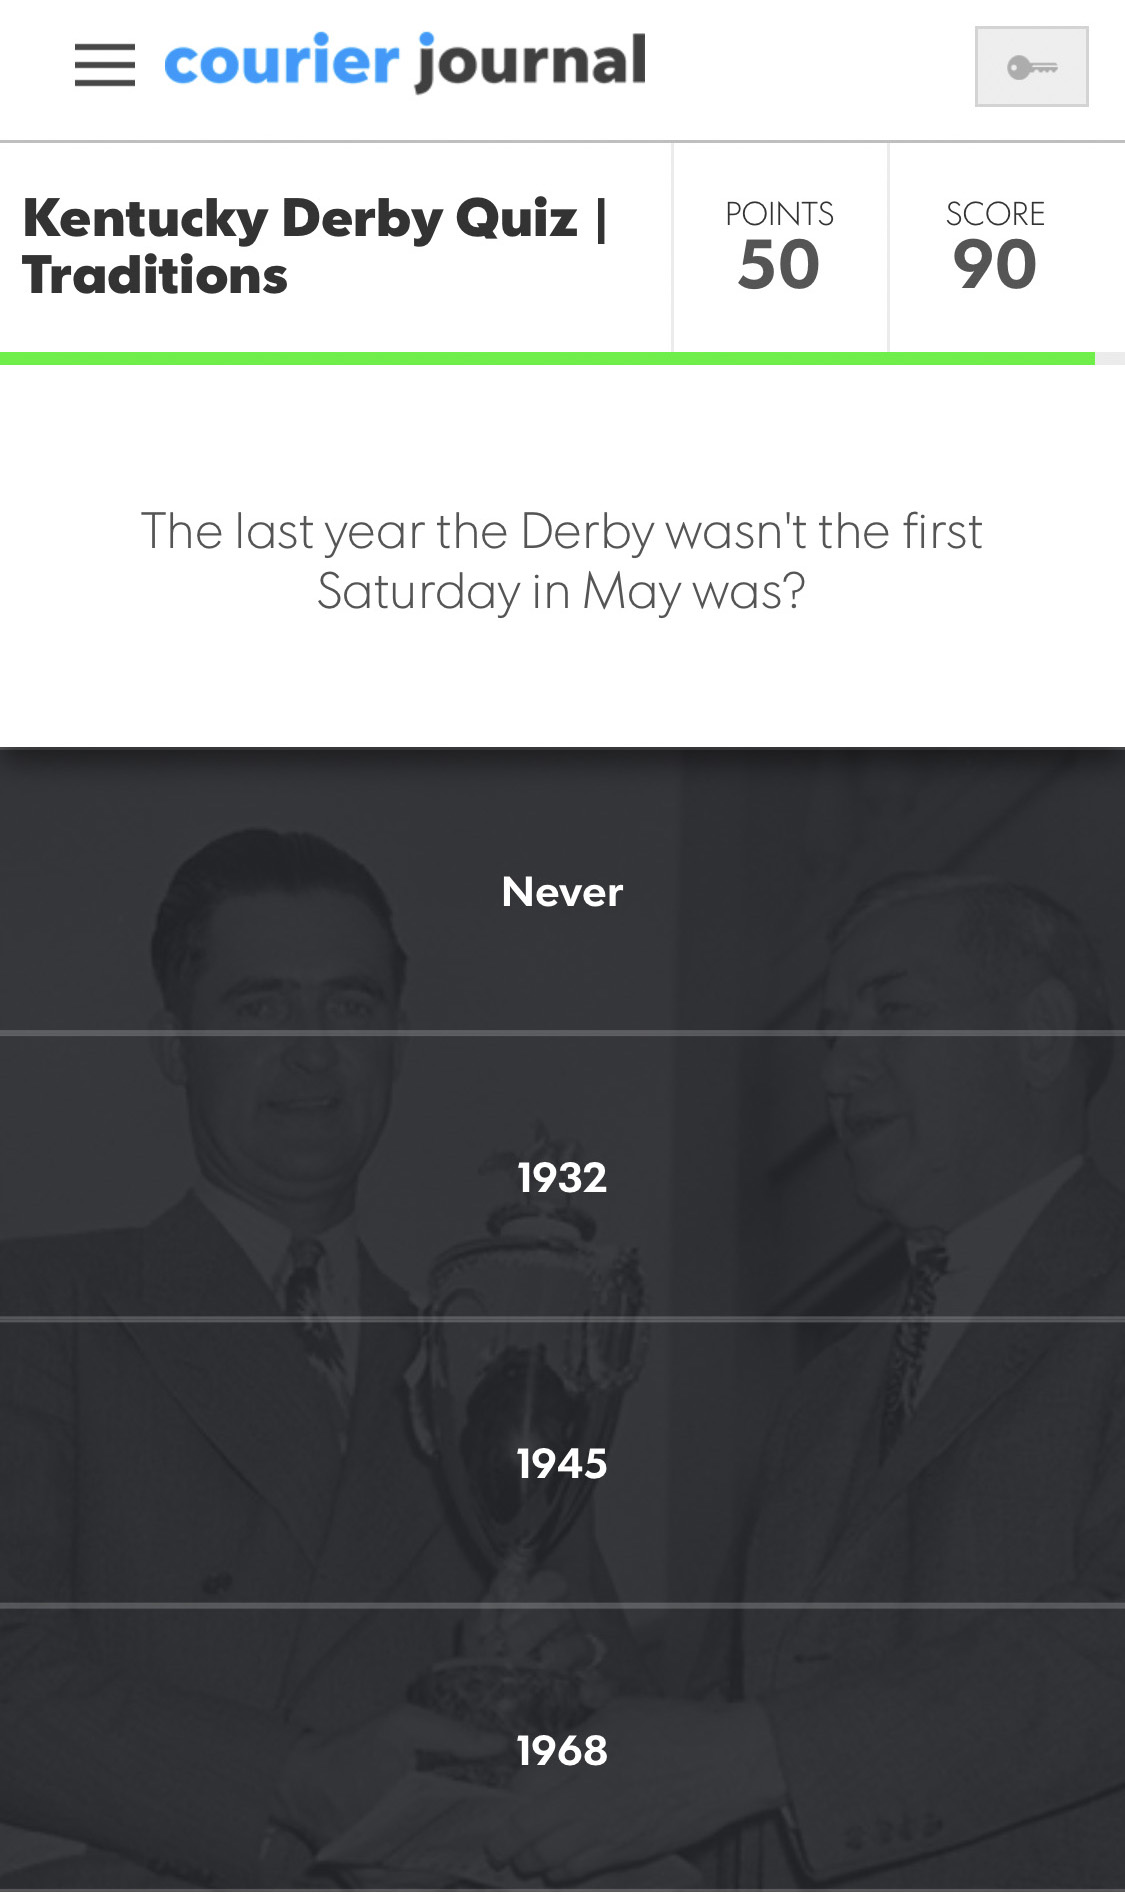 Take the quiz and test your knowledge on the Kentucky Derby traditions 